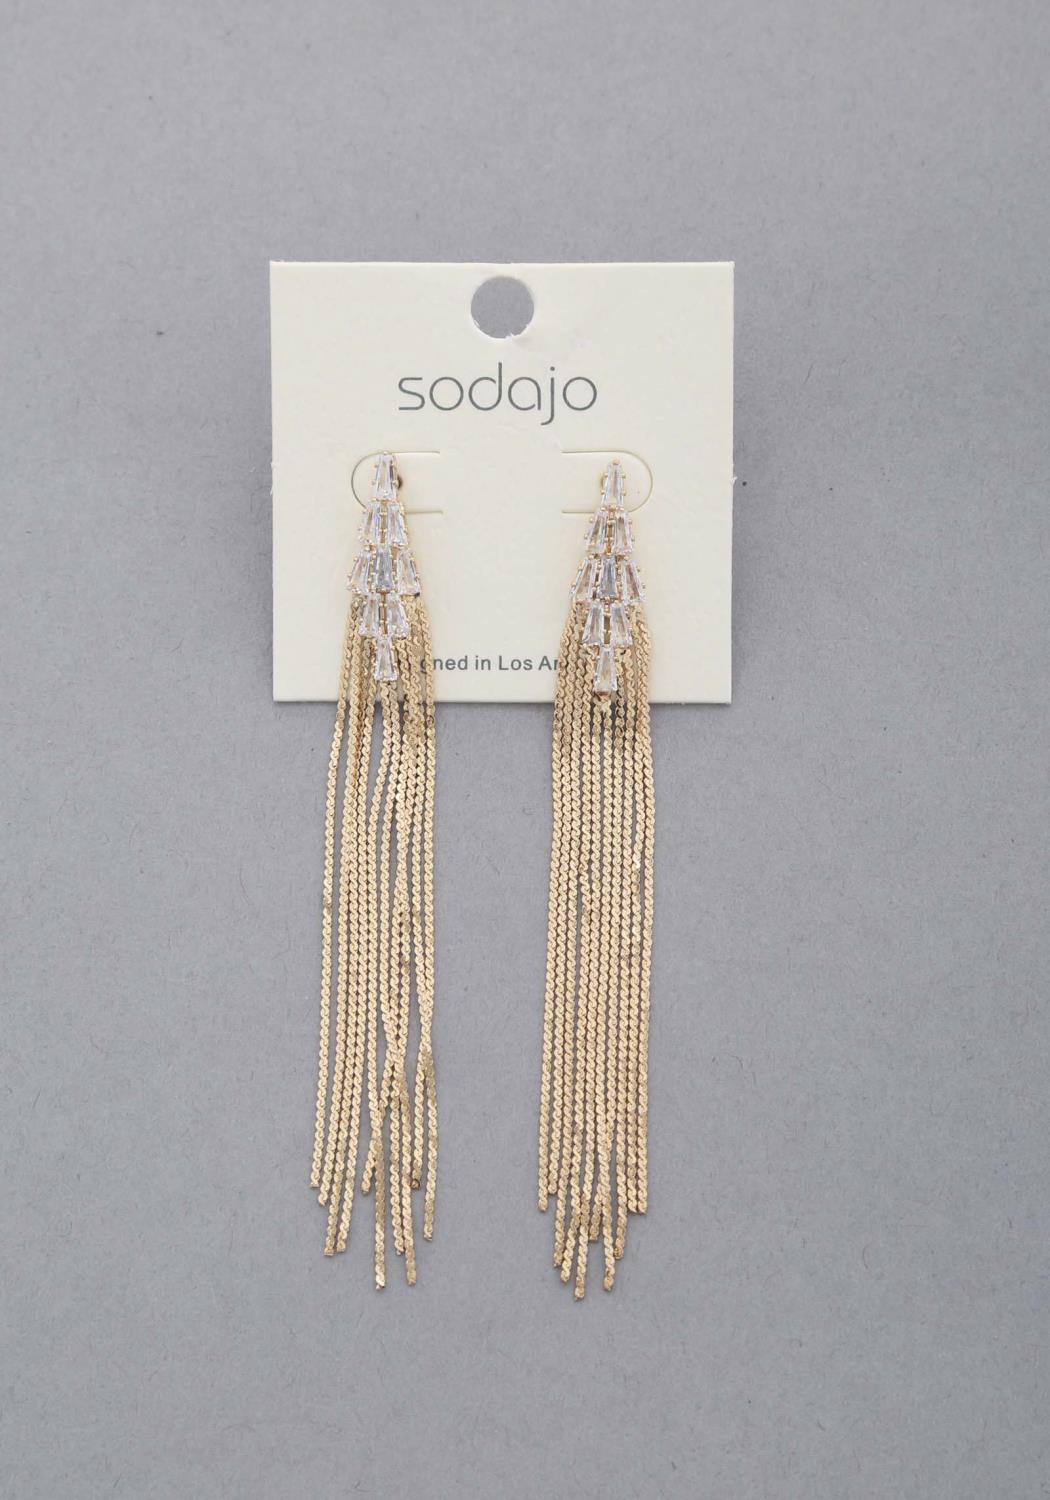 GOLD - Sodajo Crystal Metal Chain Dangle Earring - Ships from The US - earrings at TFC&H Co.